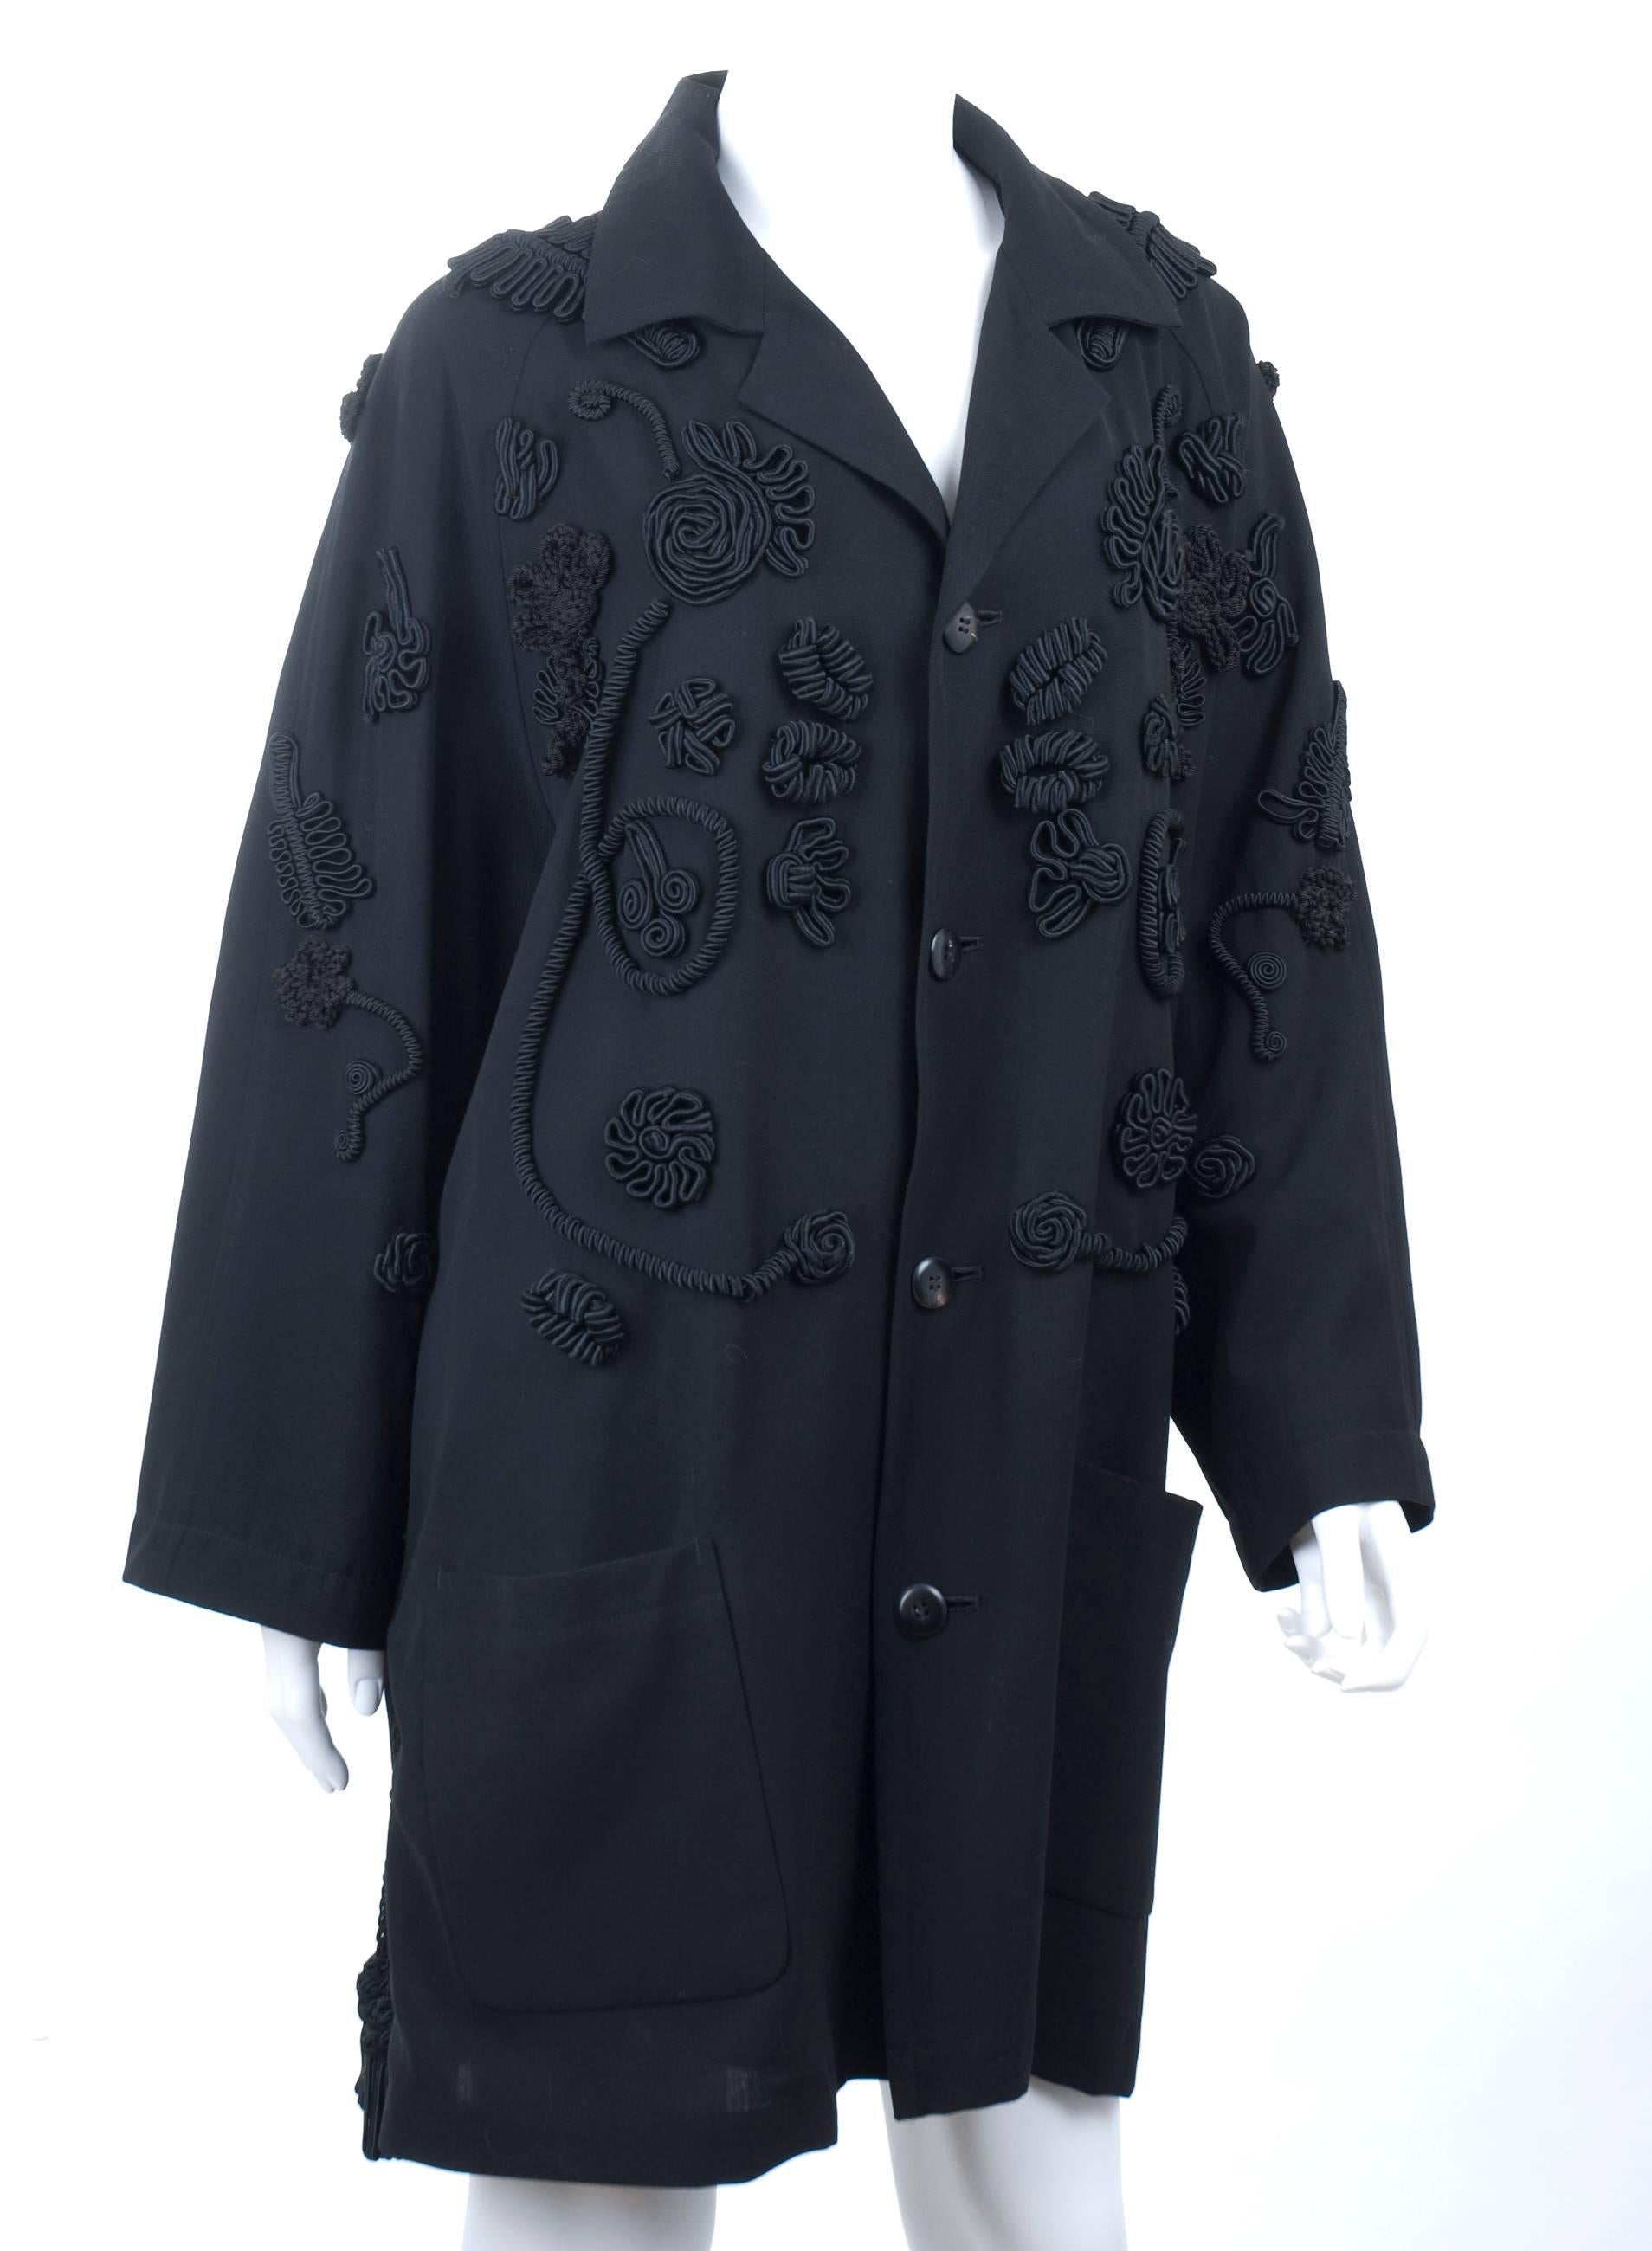 90's Yohji Yamamoto Black Coat with Corded Embroidery + Tassels Allover. For Sale 2